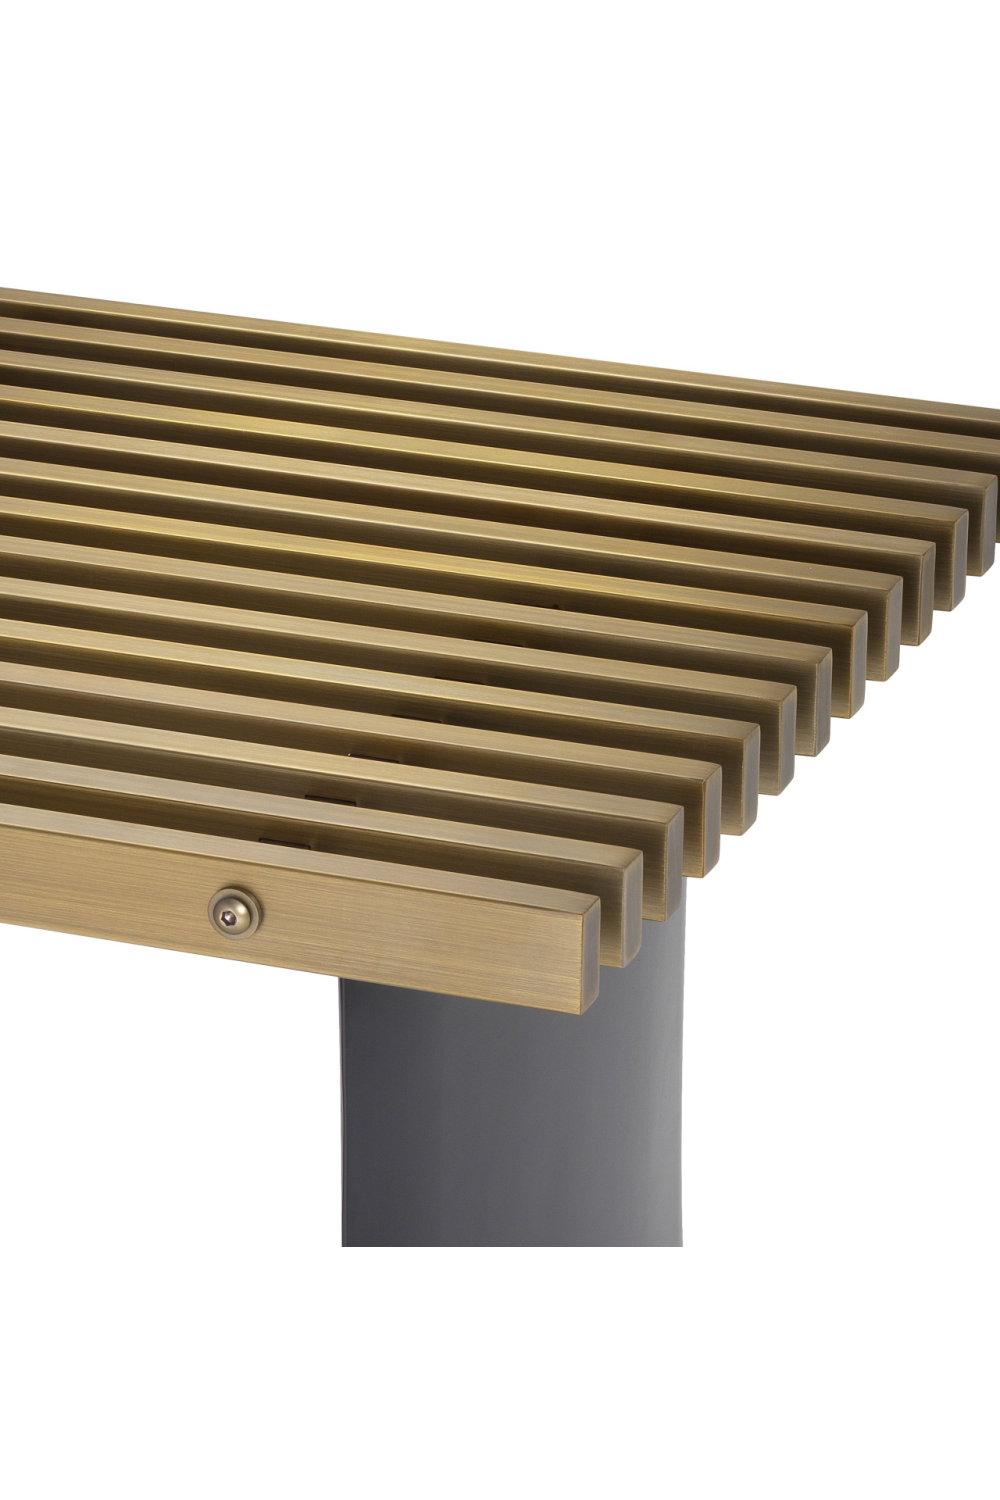 Brushed Brass Square Side Table | Eichholtz Vauclair | Oroa.com